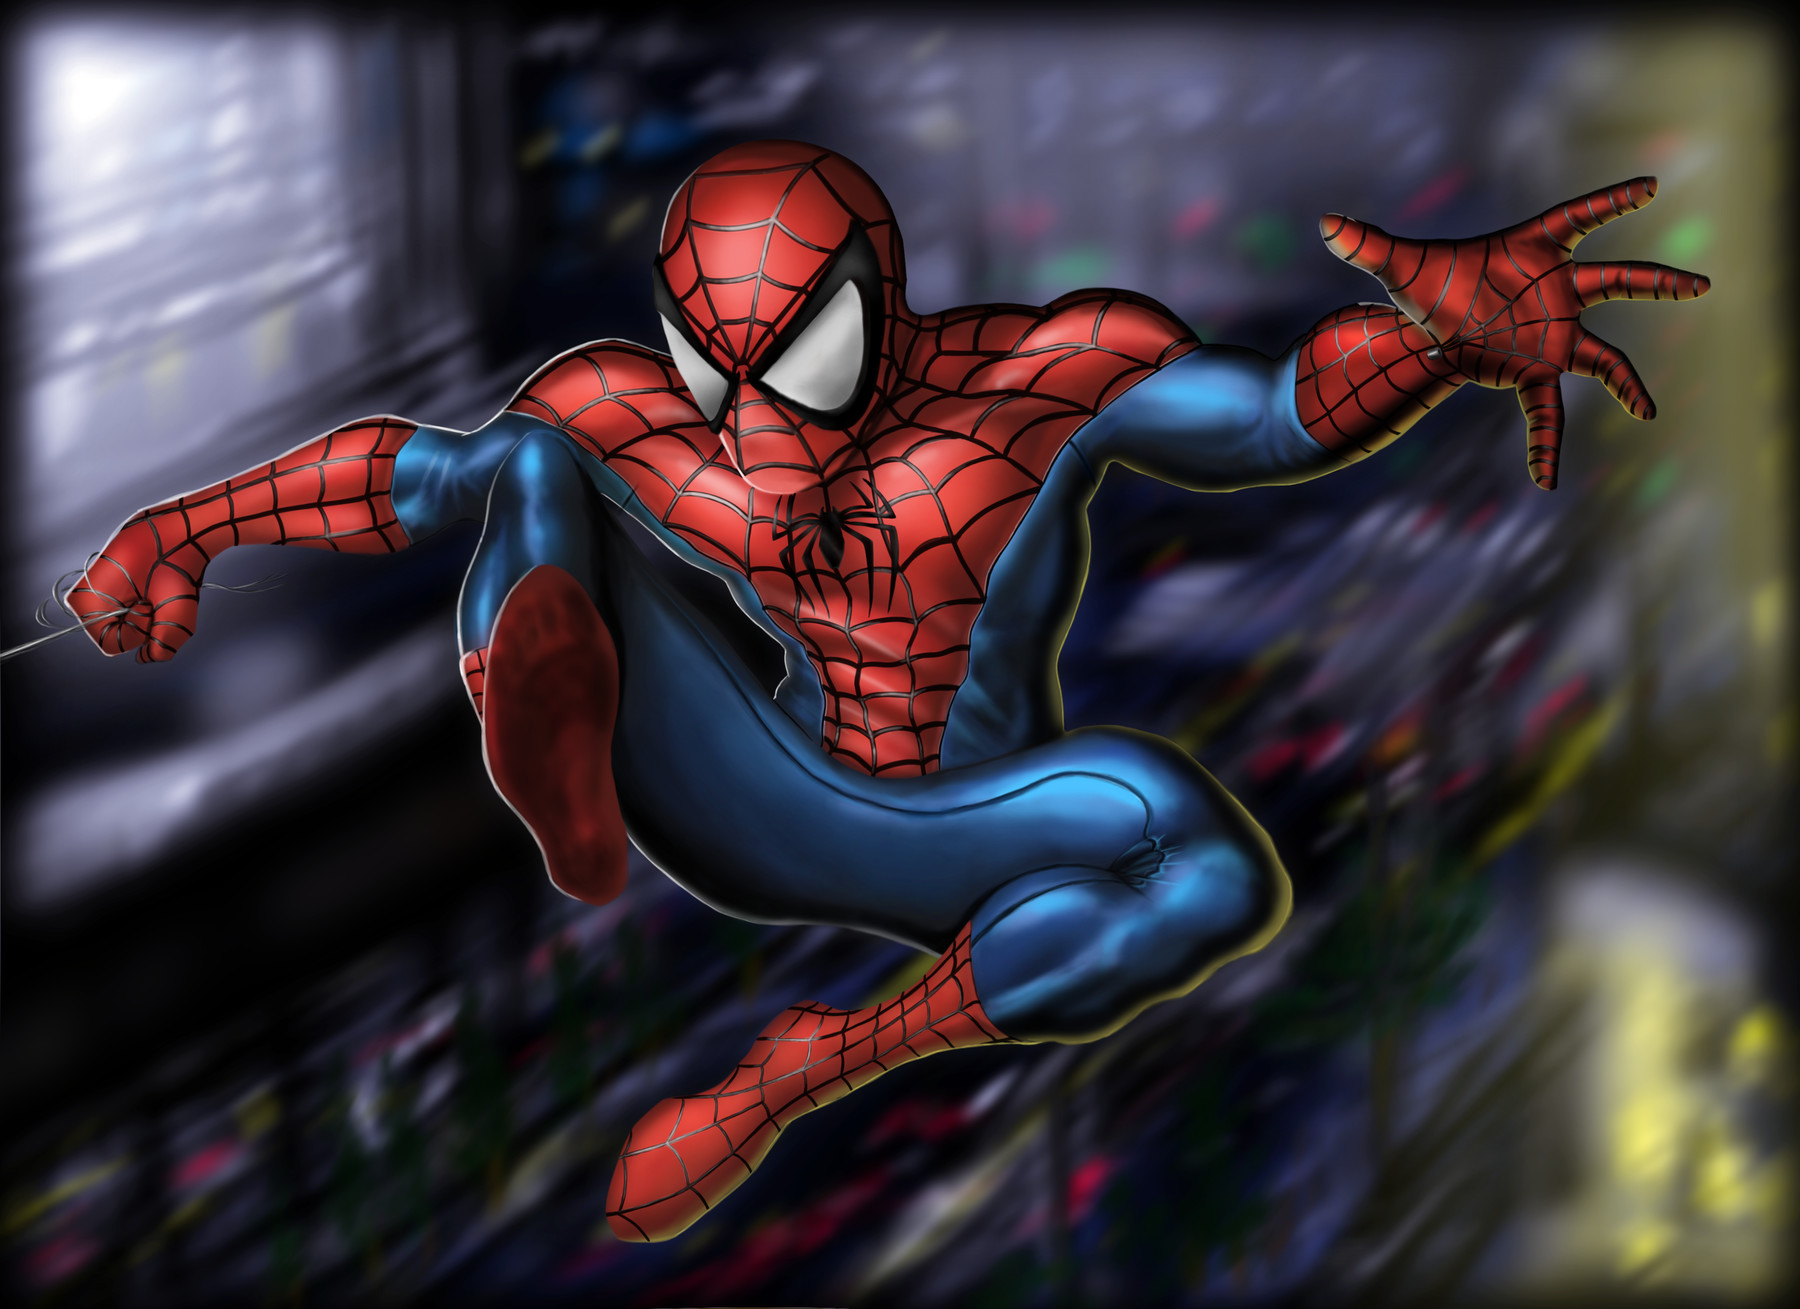 ArtStation - Spider-Man Poster with PSD file